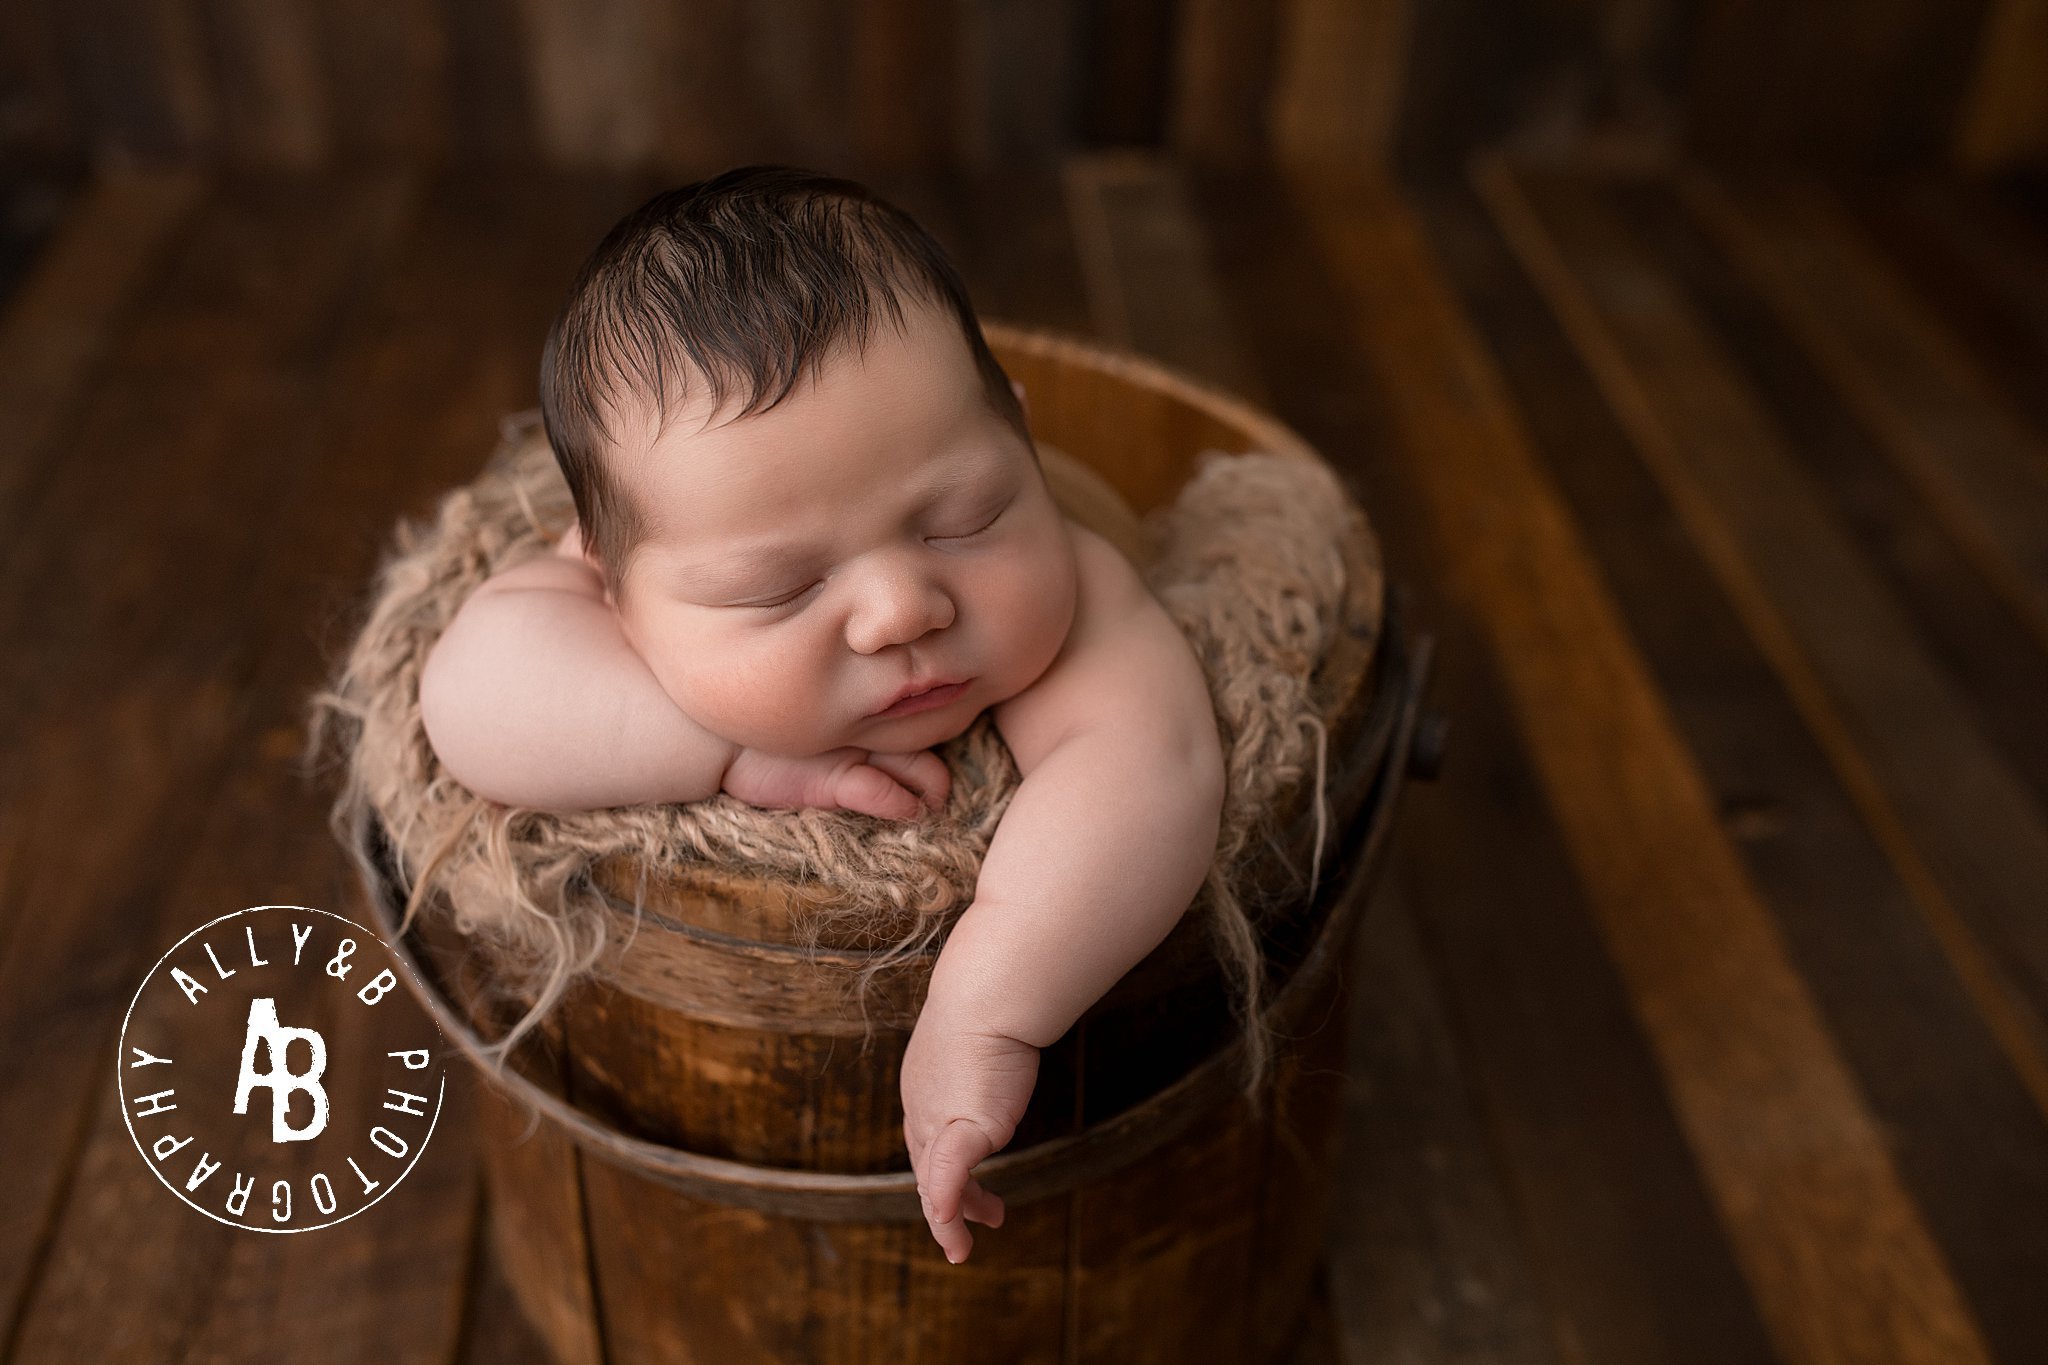 https://images.squarespace-cdn.com/content/v1/57550bf10442625aeea8c0ad/1693492032918-DOLCZY76520XUR72XPZ4/newborn+photos+in+naperville.jpg